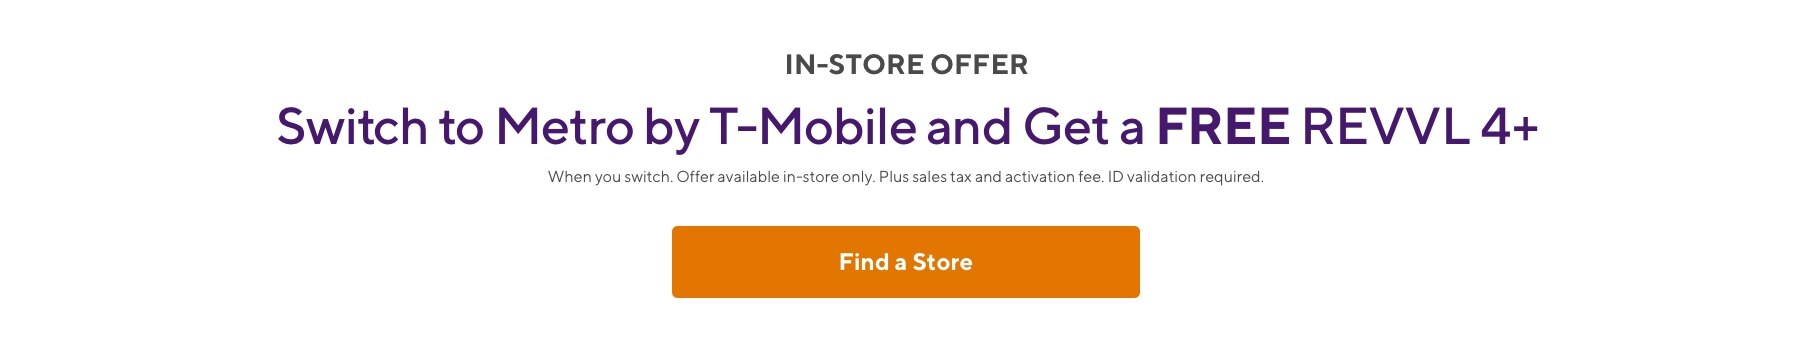 Switch to Metro by T-Mobile and get a free REVVL 4+! When you switch. Offer available in-store only. Plus sales tax and activation fee. ID validation required.